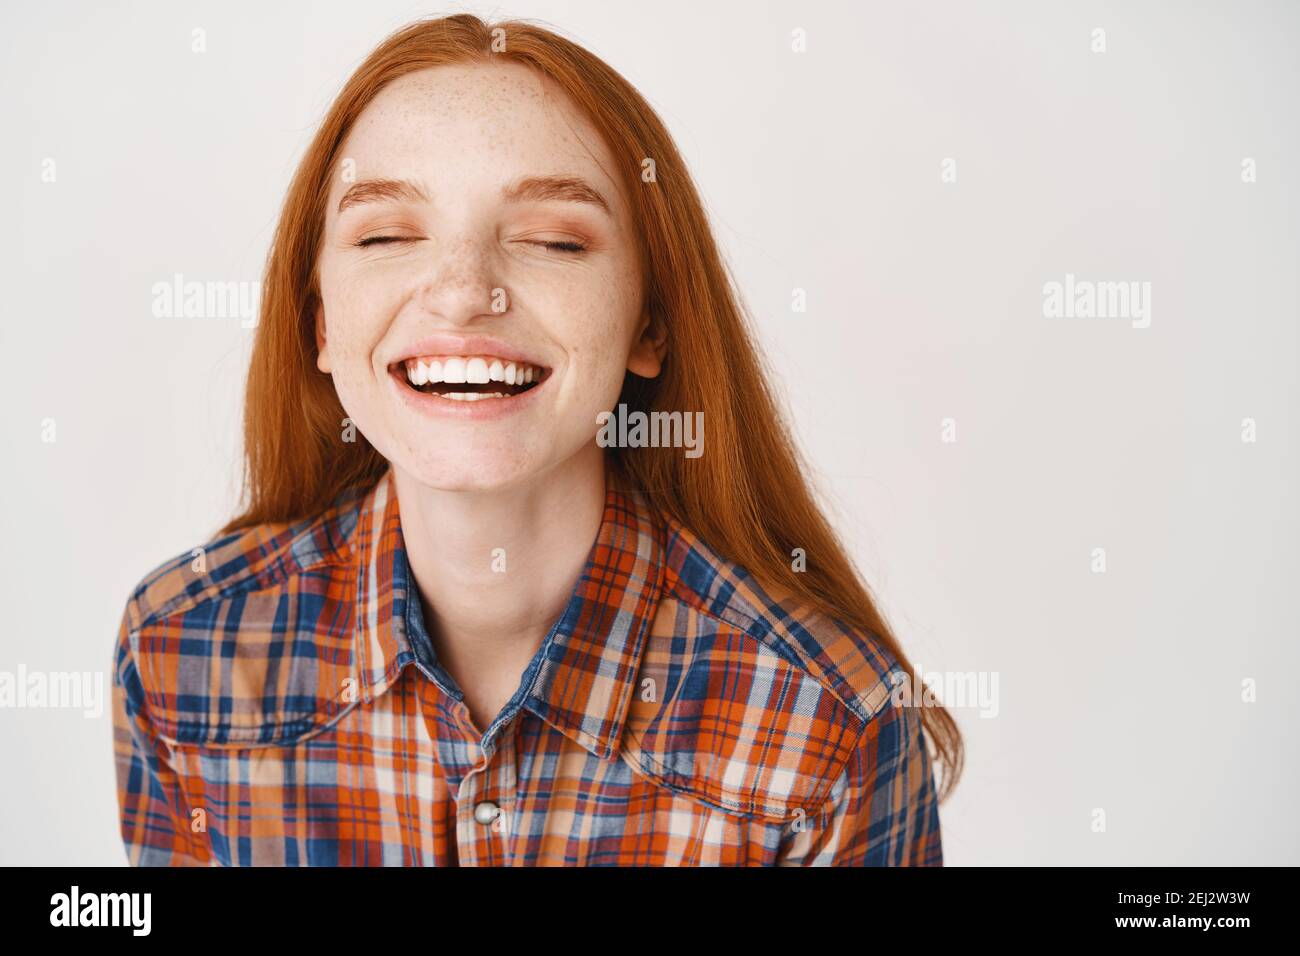 Close-up of beautiful redhead woman laughing with closed eyes, standing over white background Stock Photo